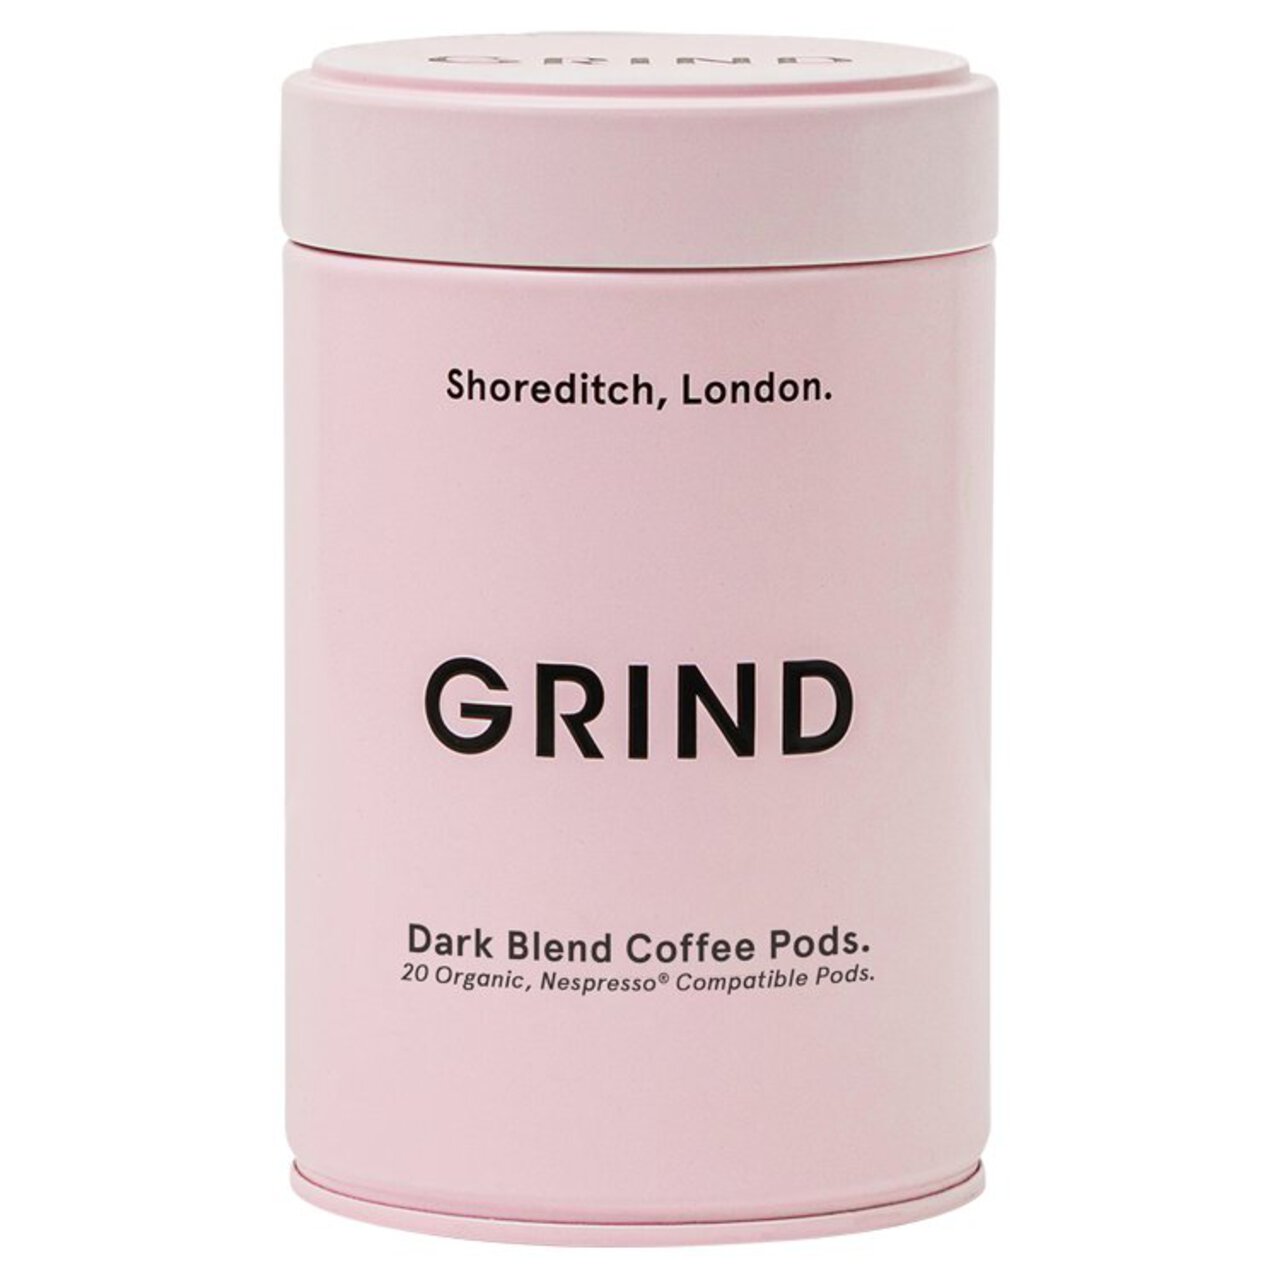 Grind Decaf Blend Compostable Coffee Pods Tin 20 per pack